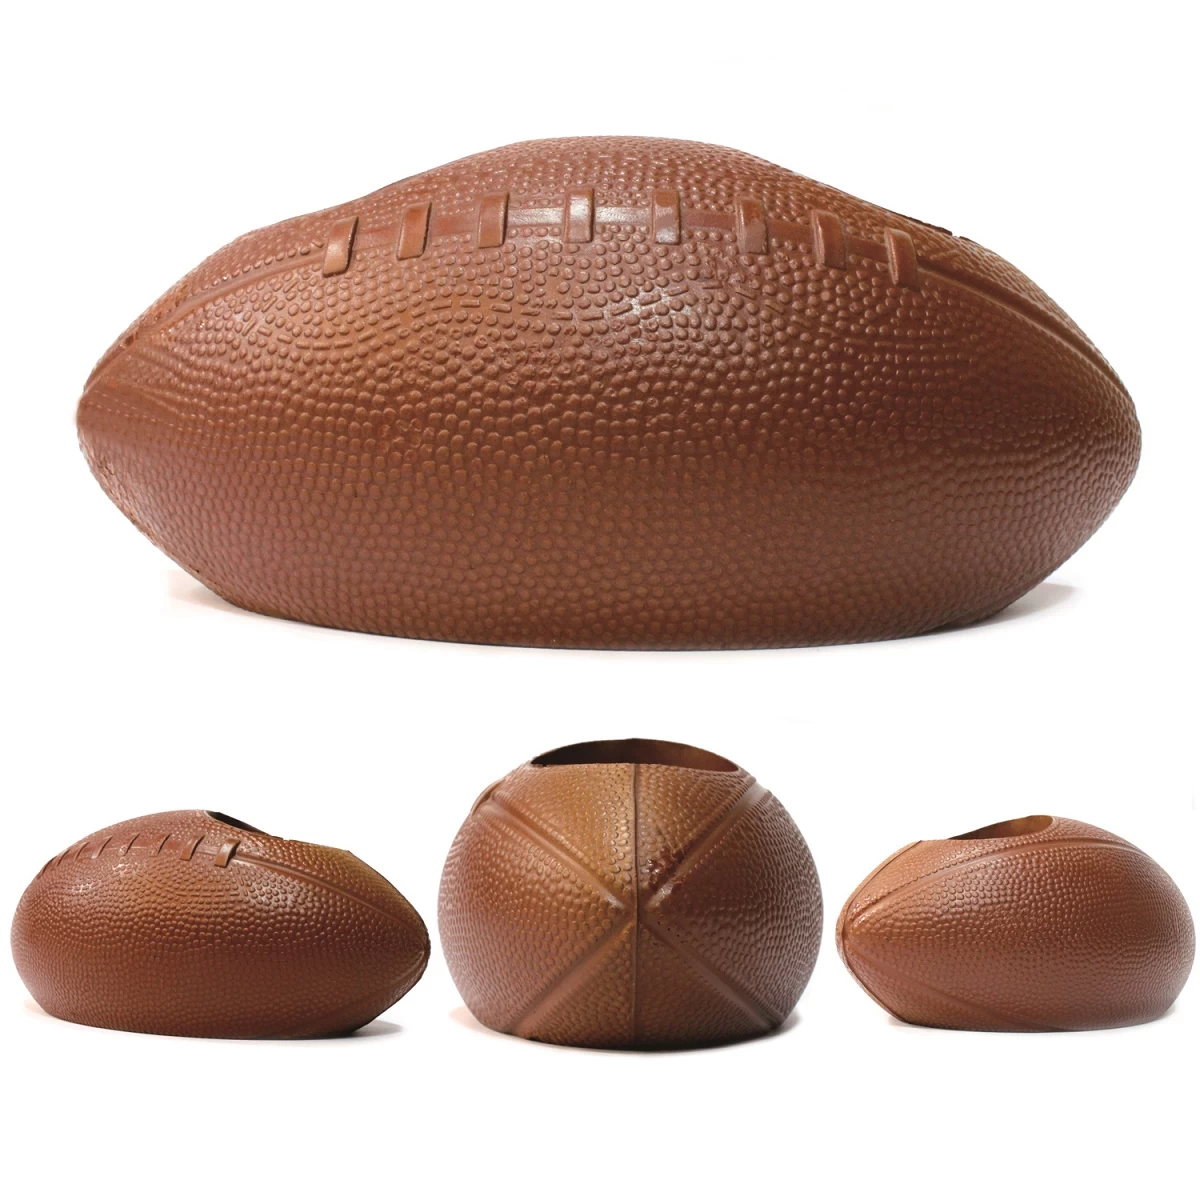 China whole sale foam rugby ball,customizable children adult play toys,PU Football article,Rugby Football manufacturer